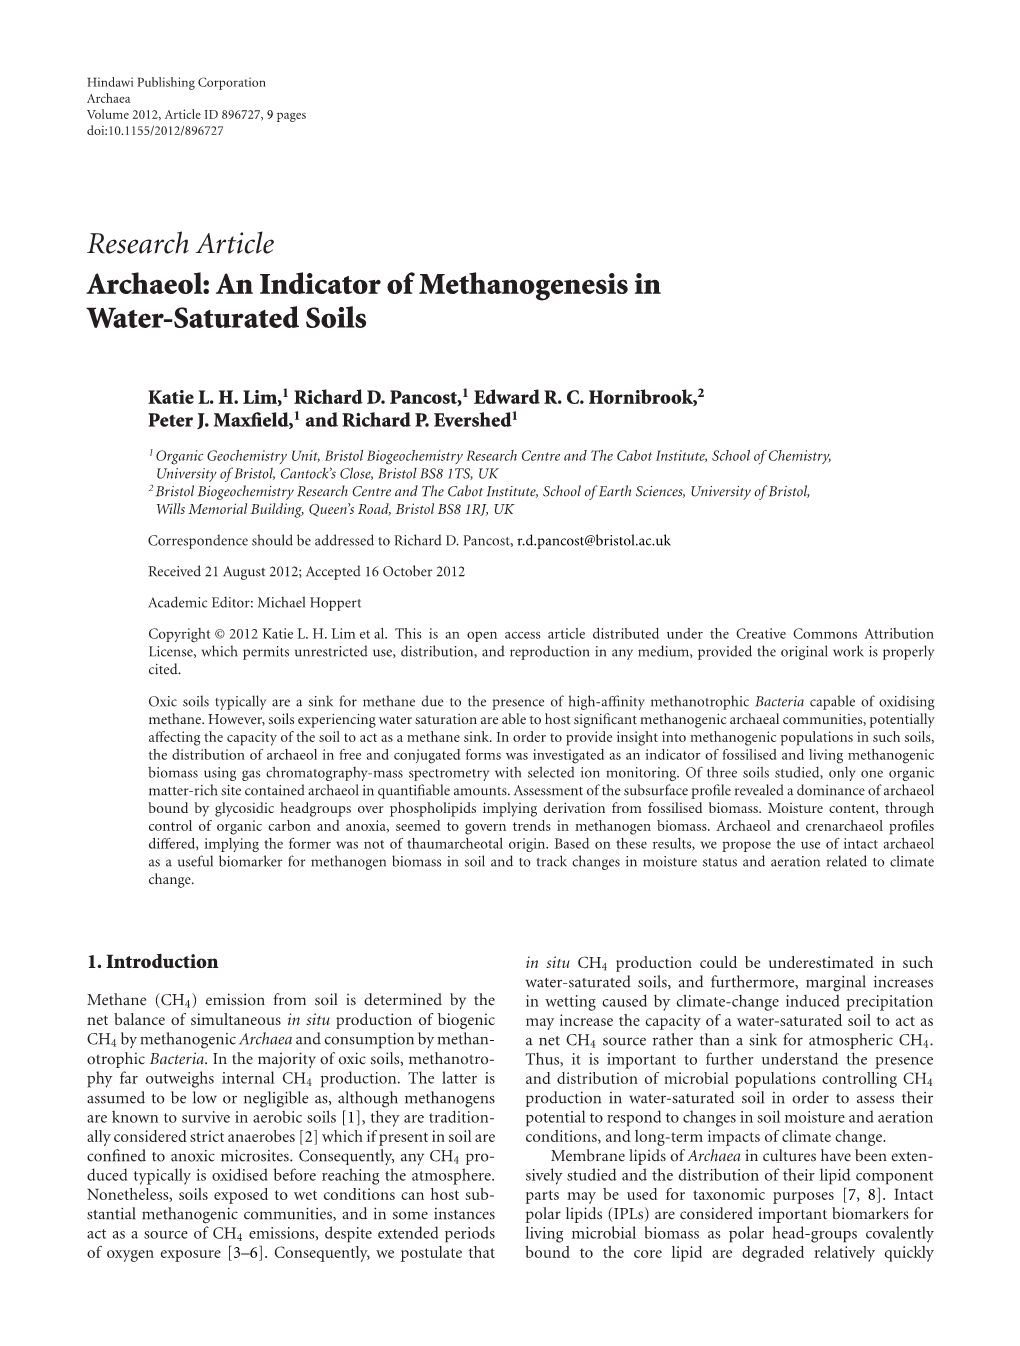 Archaeol: an Indicator of Methanogenesis in Water-Saturated Soils